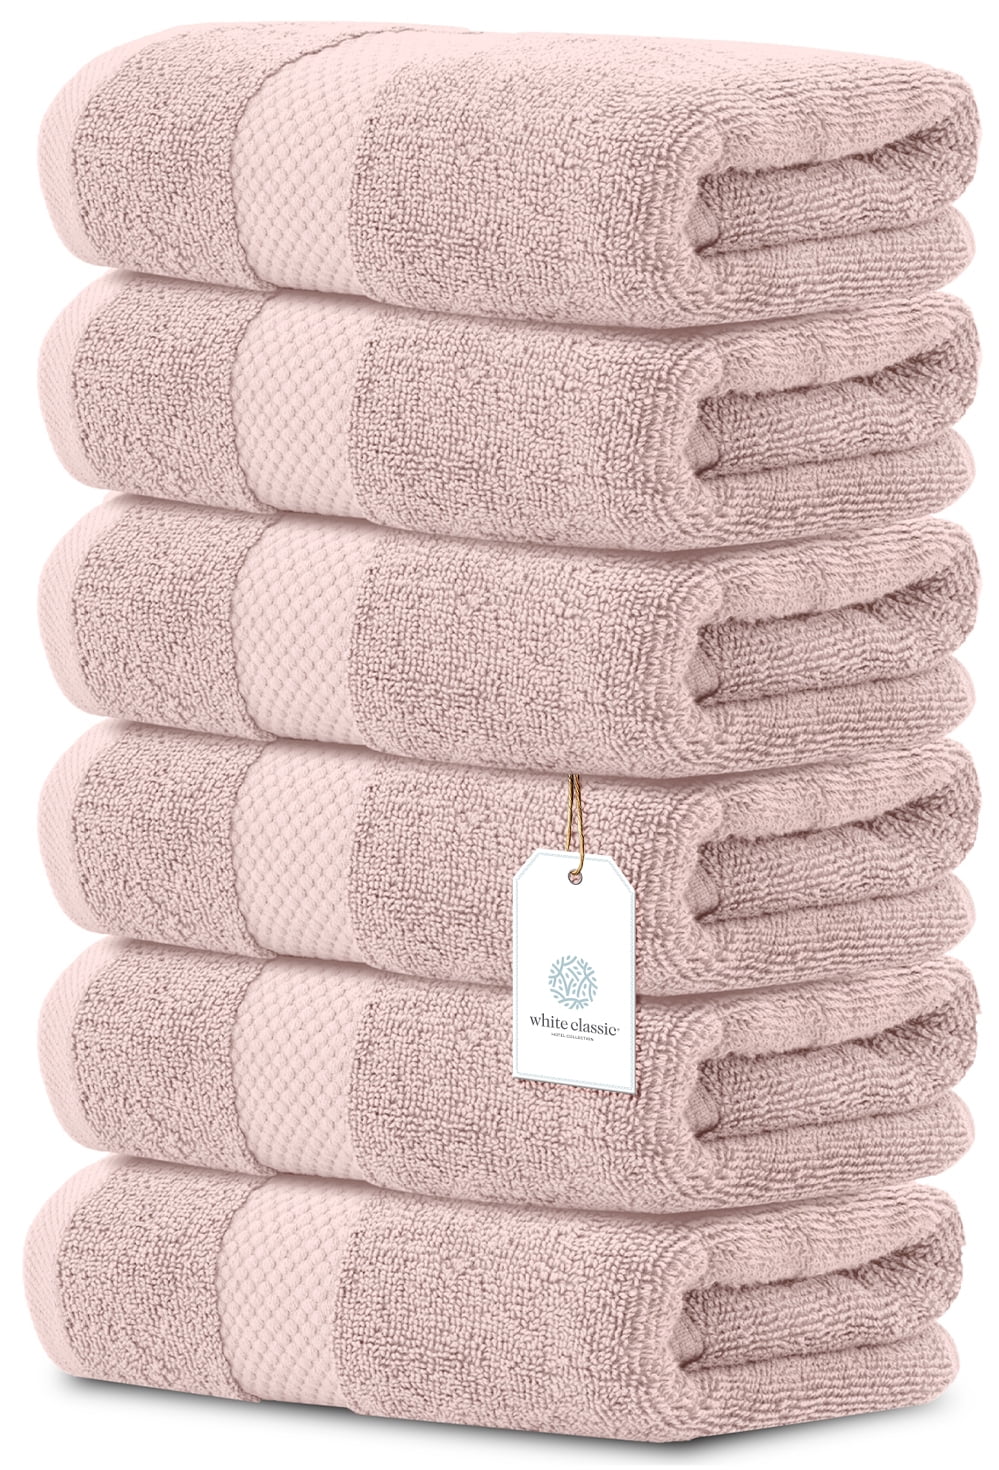 UGG 20046 Pasha Cotton 2-Piece Hand Towel Soft Fluffy Luxury Highly  Absorbent Spa-Like Hotel Luxurious Machine Washable Towels, Hand 28 x  16-inch